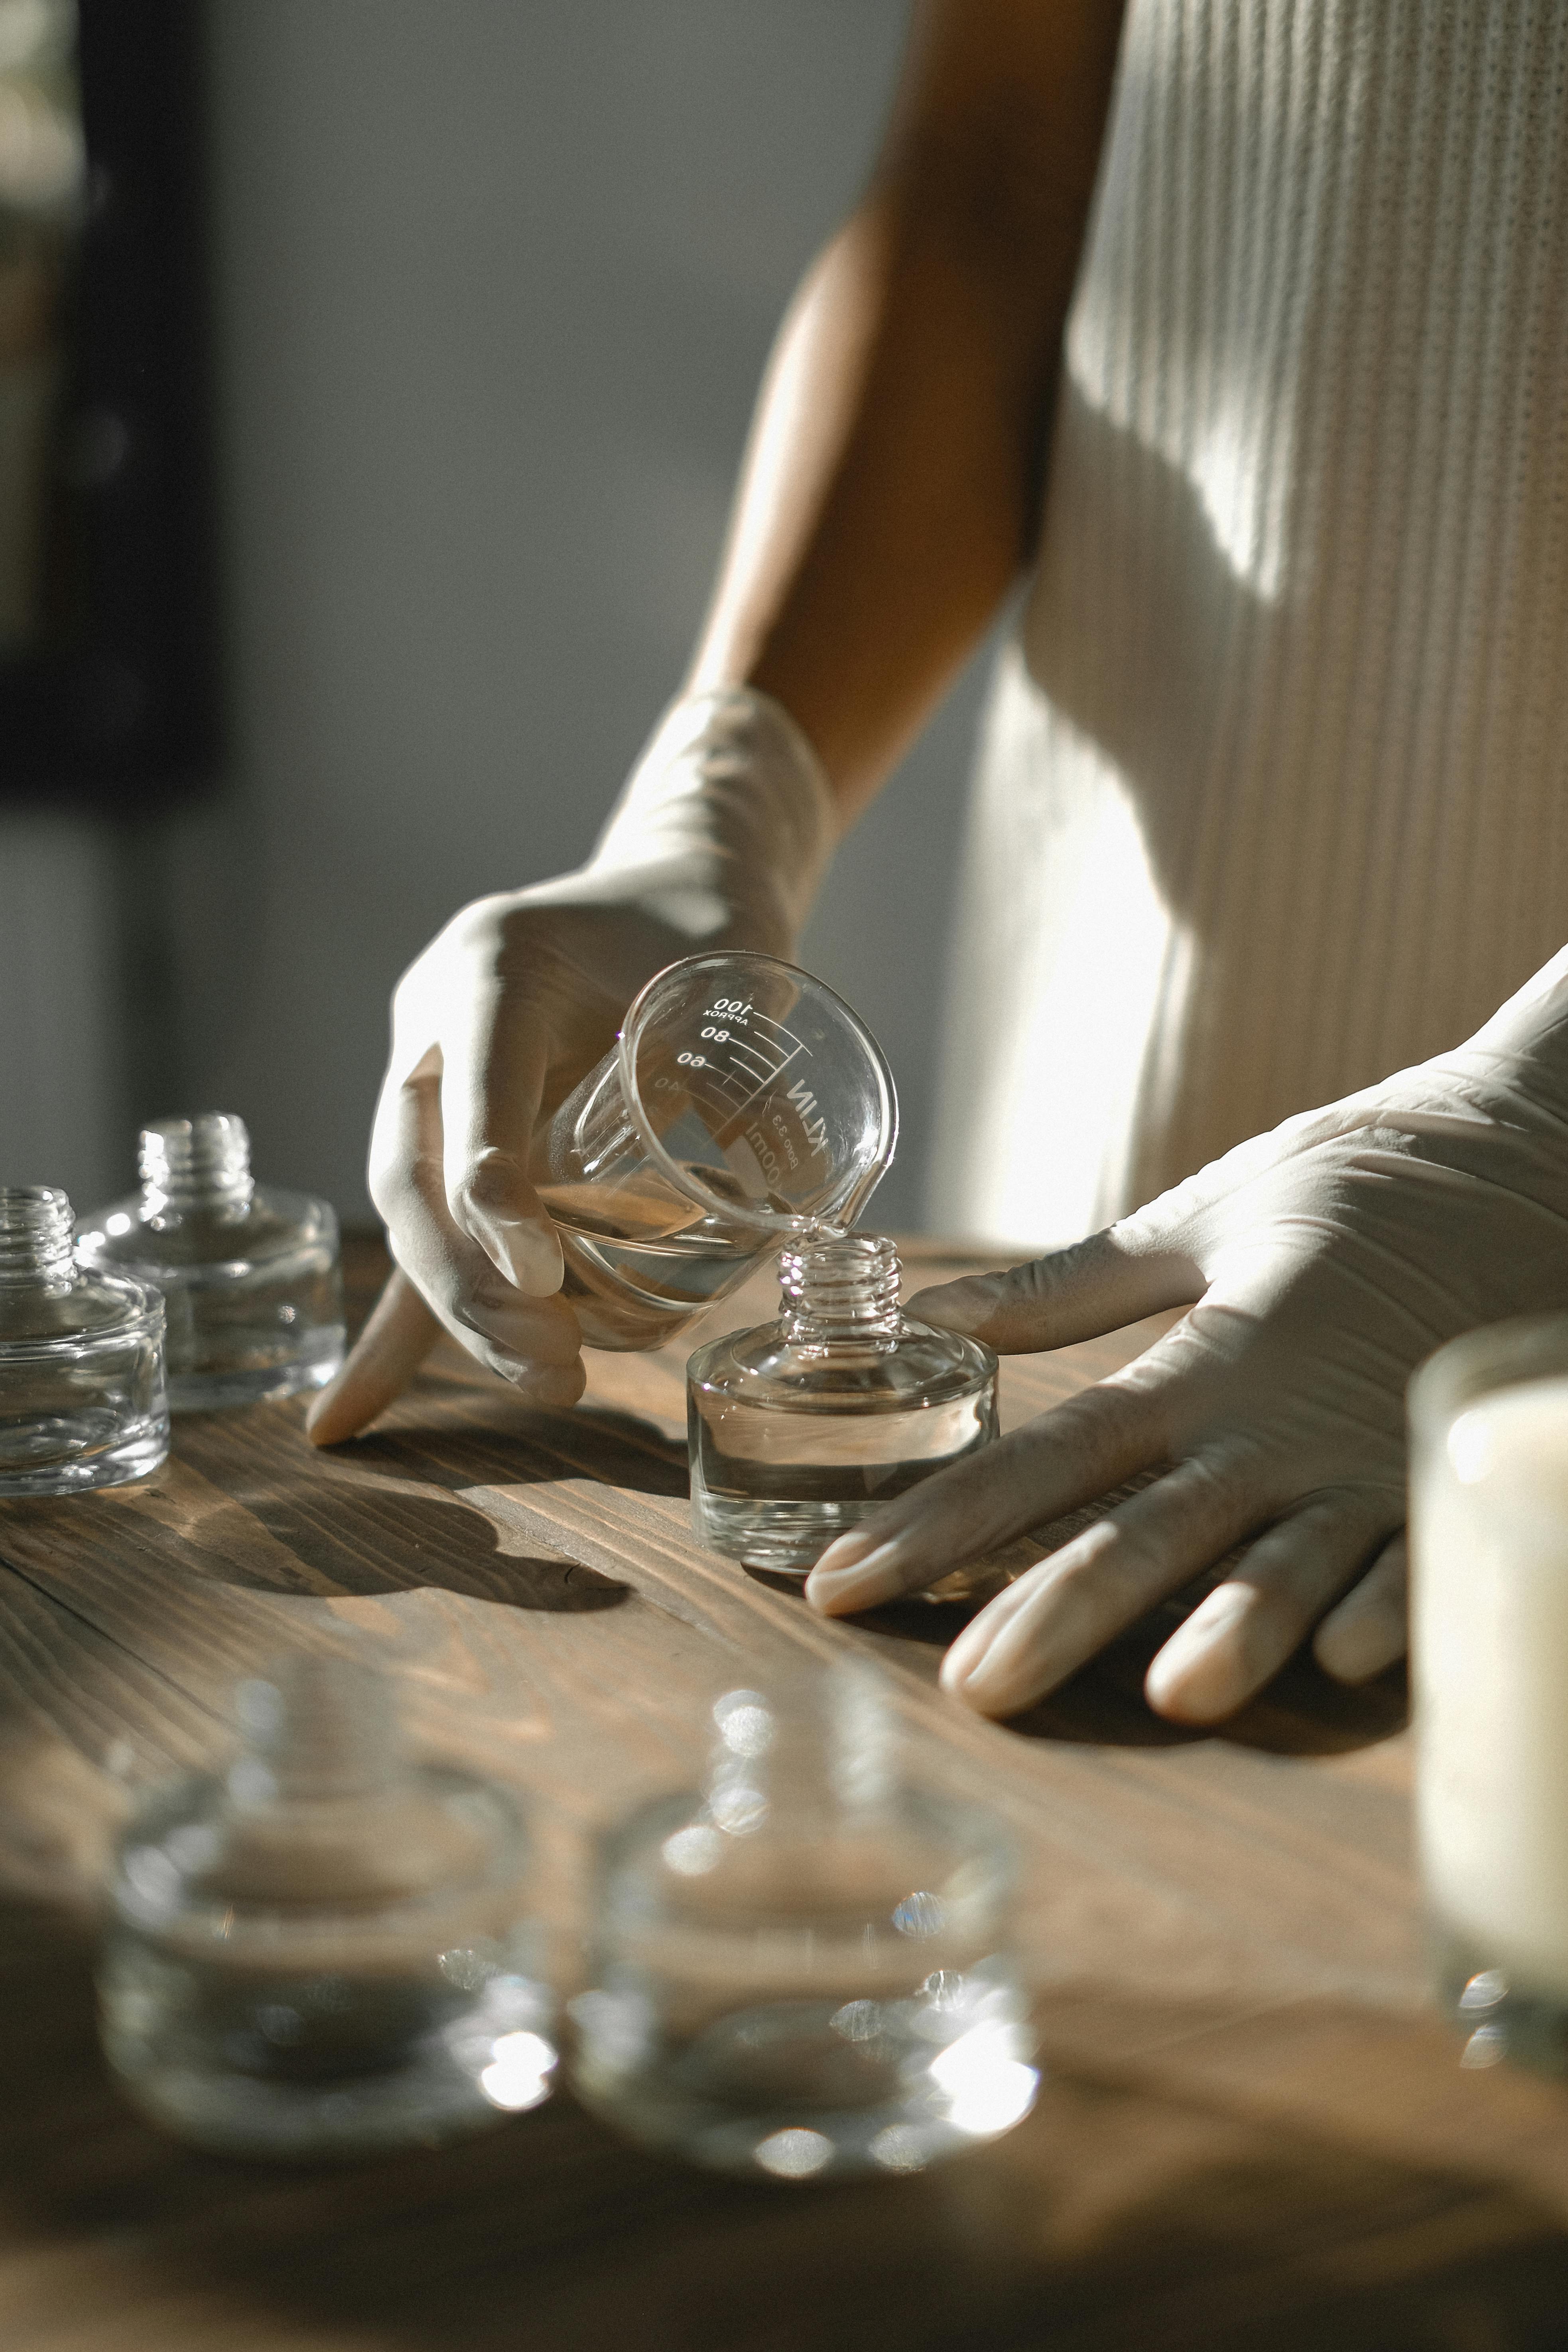 A pair of gloved hands pouring a solution into a perfume bottle | Source: Pexels